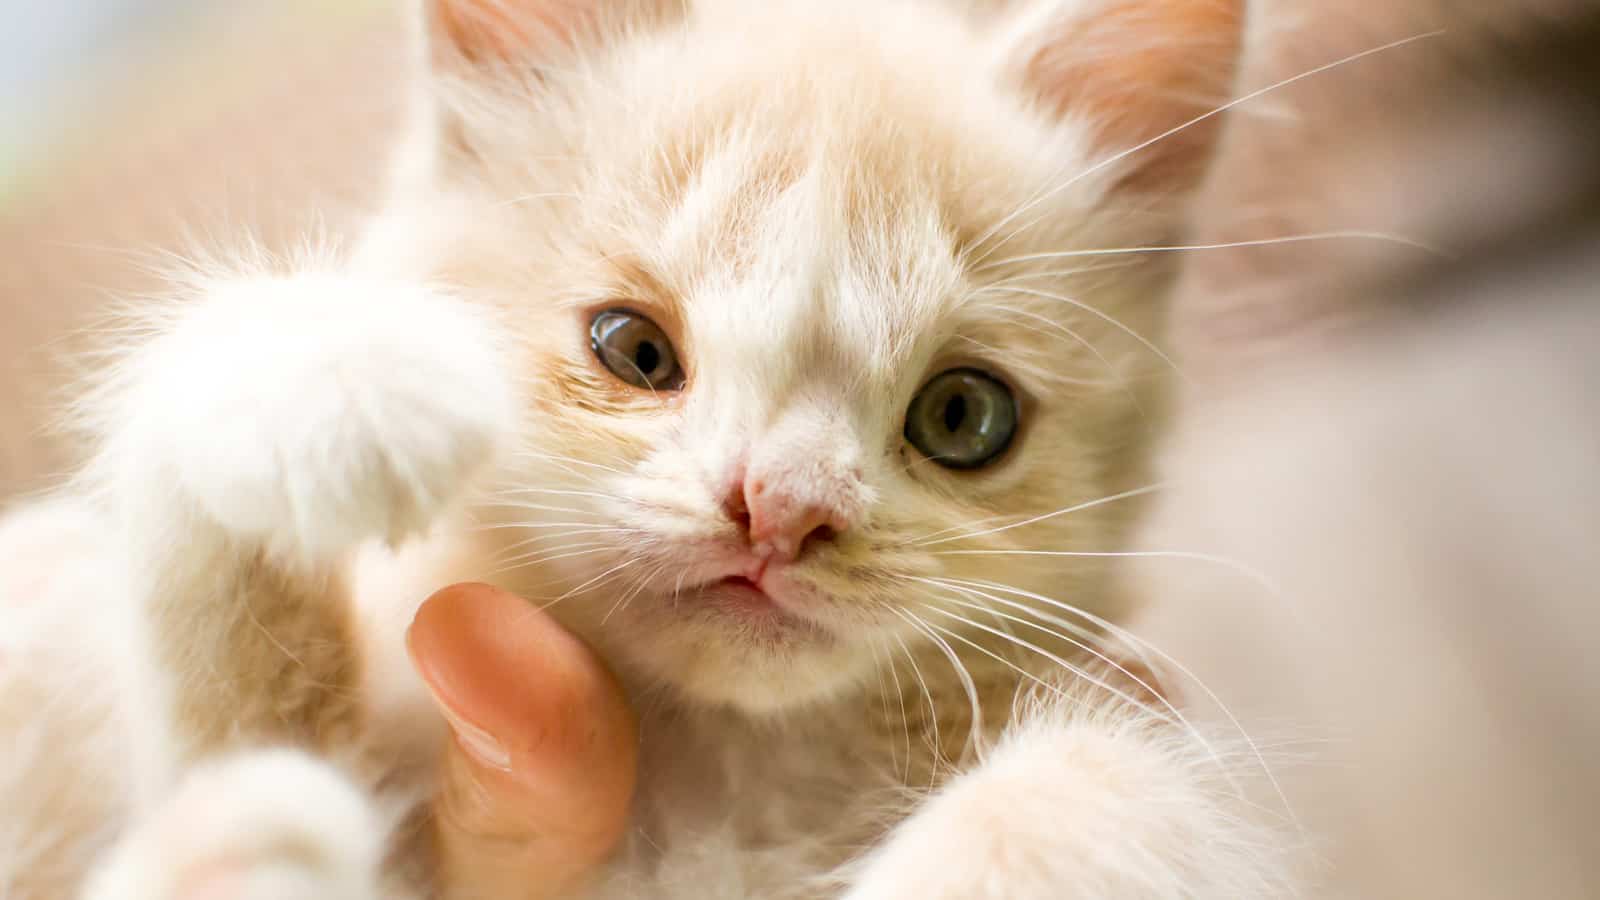 Kitten with a birth defect Cleft lip